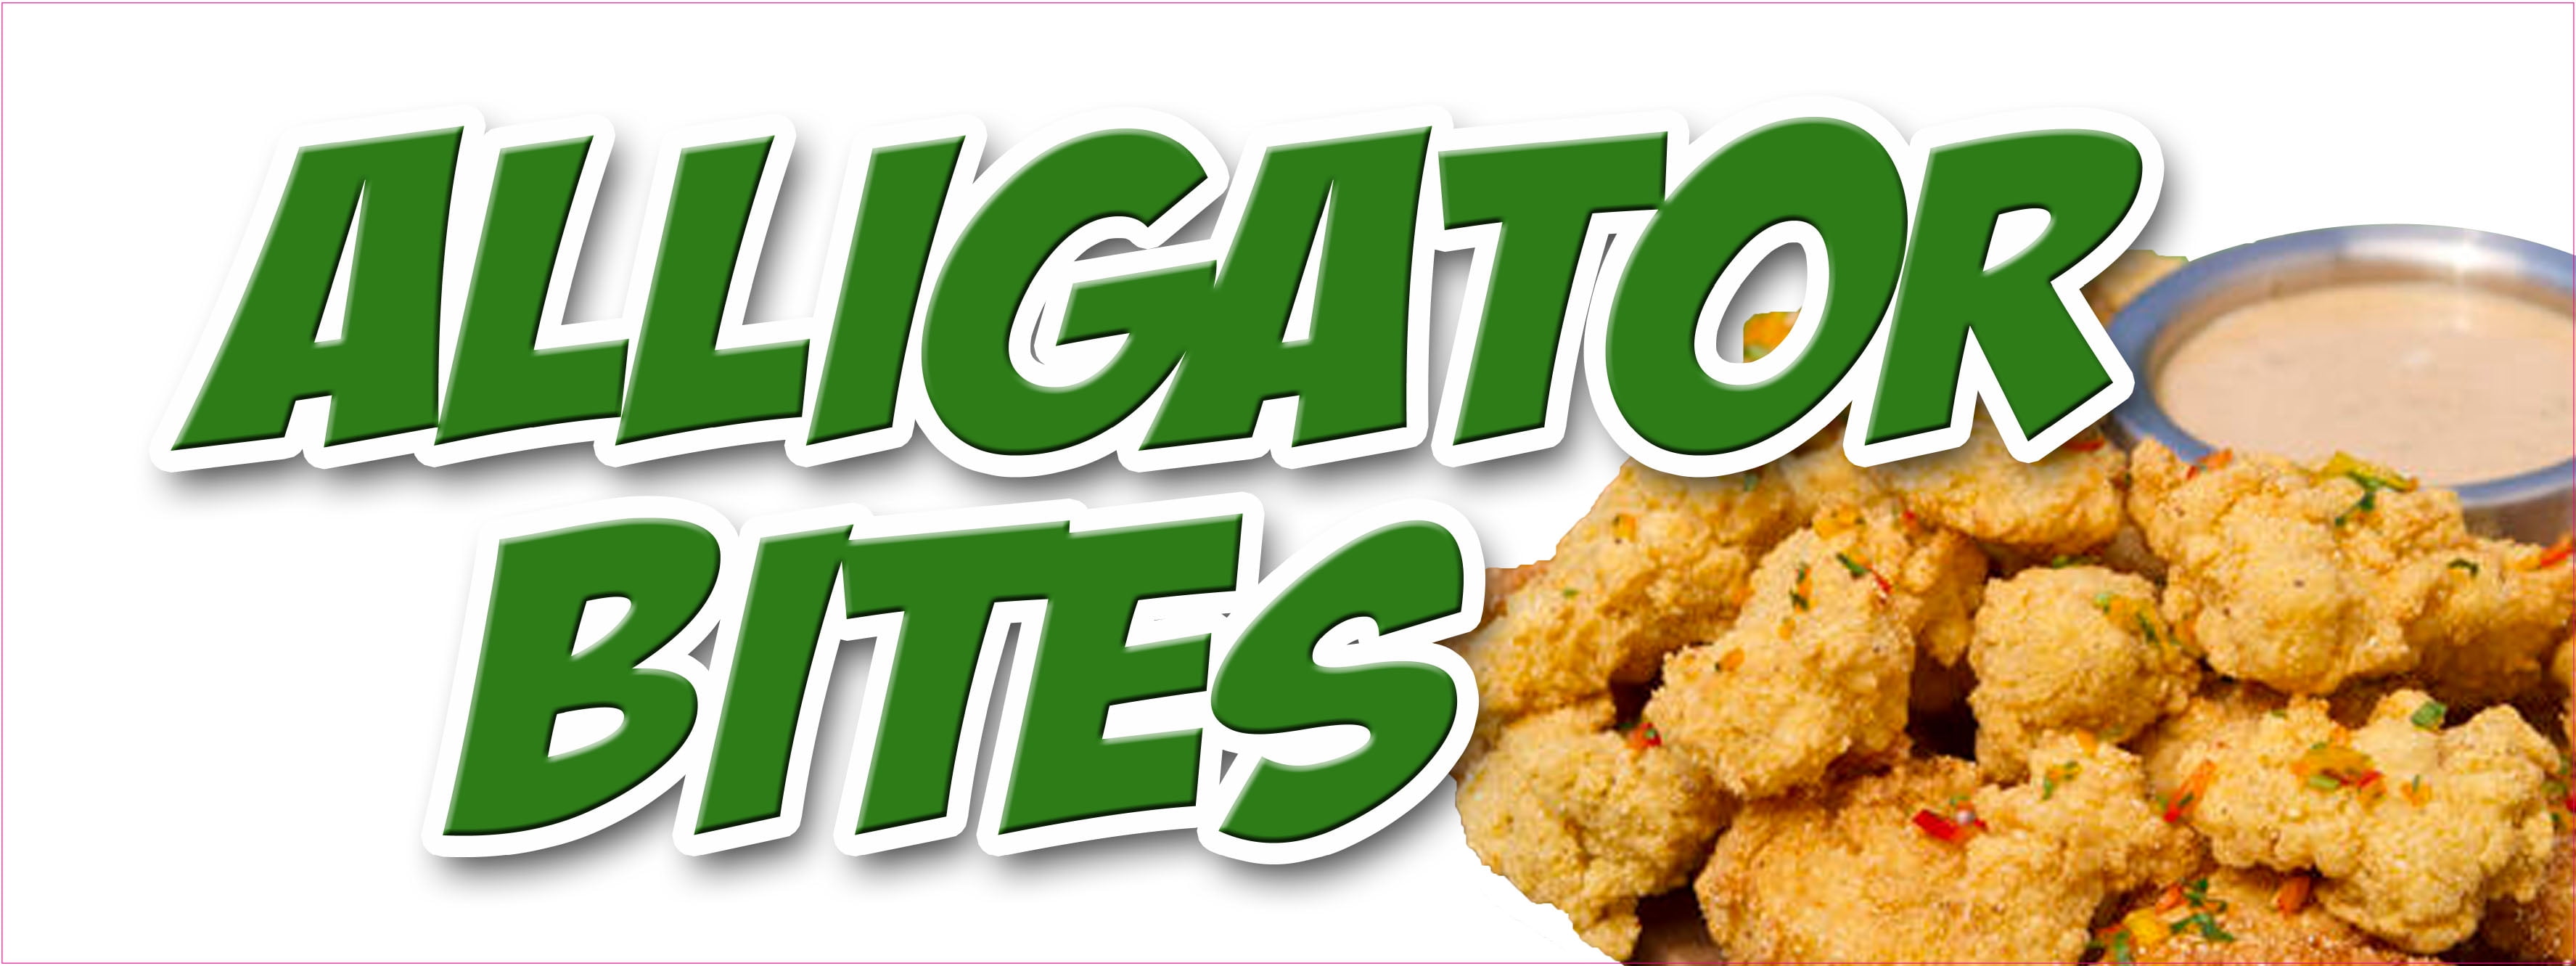 Alligator Nuggets DECAL Food Truck Sign Restaurant Concession Choose Your Size 